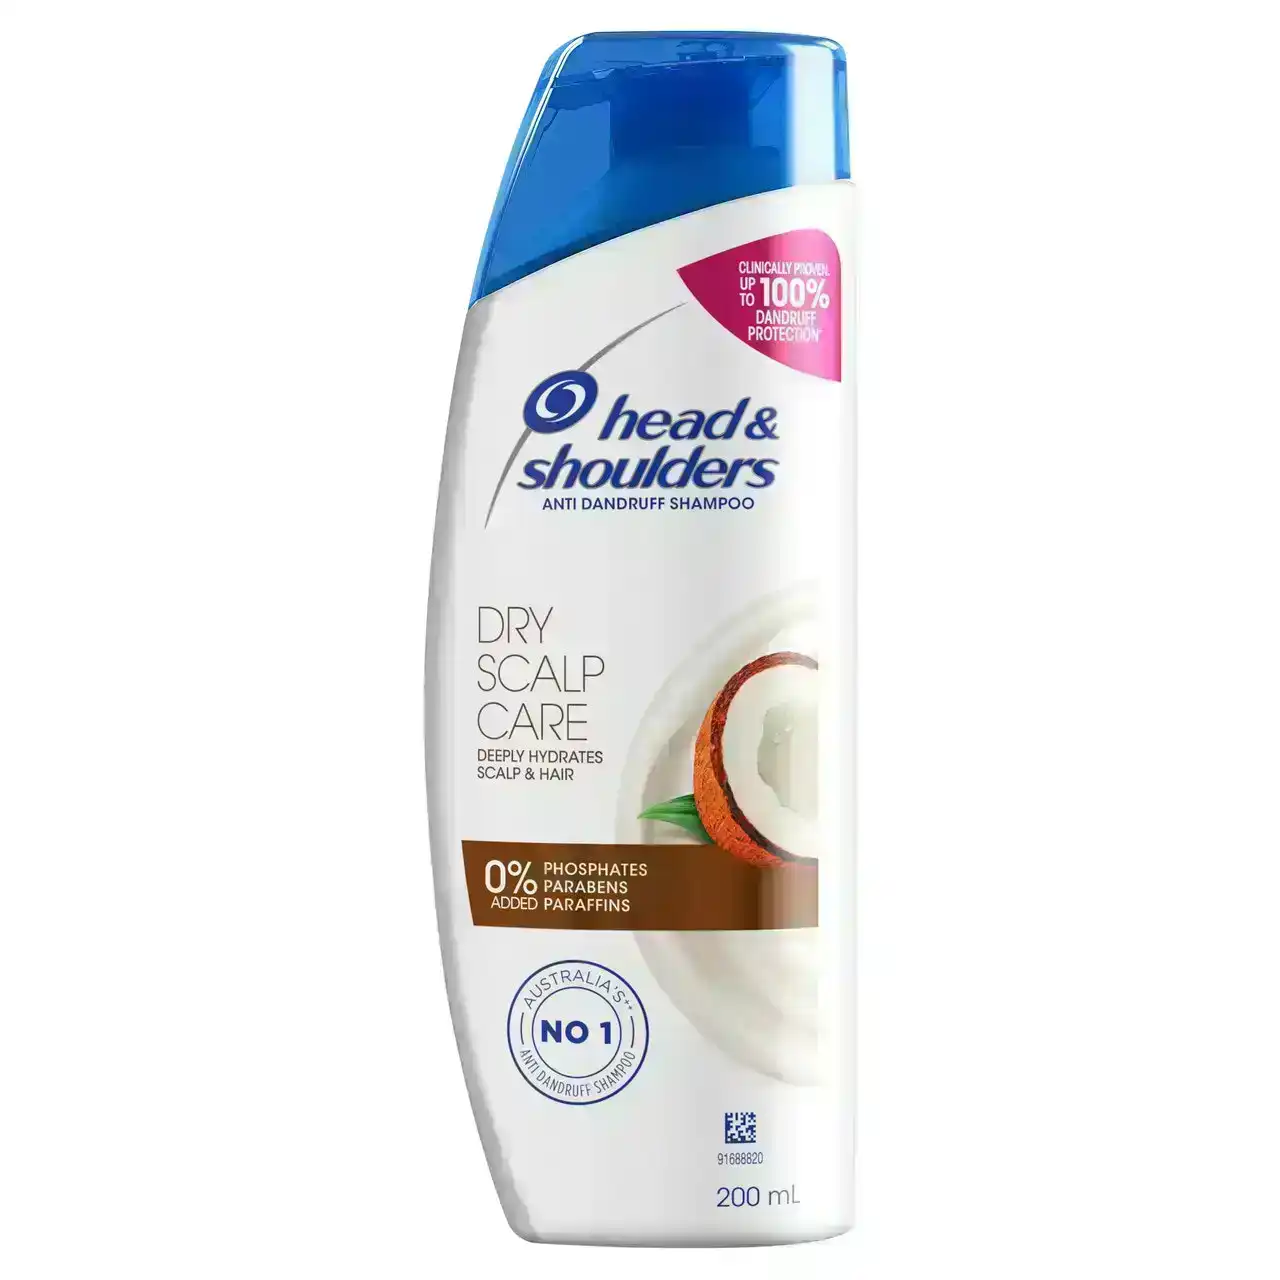 Head & Shoulders Dry Scalp Care Anti Dandruff Shampoo with Coconut Oil for Dry Scalp 200 ml